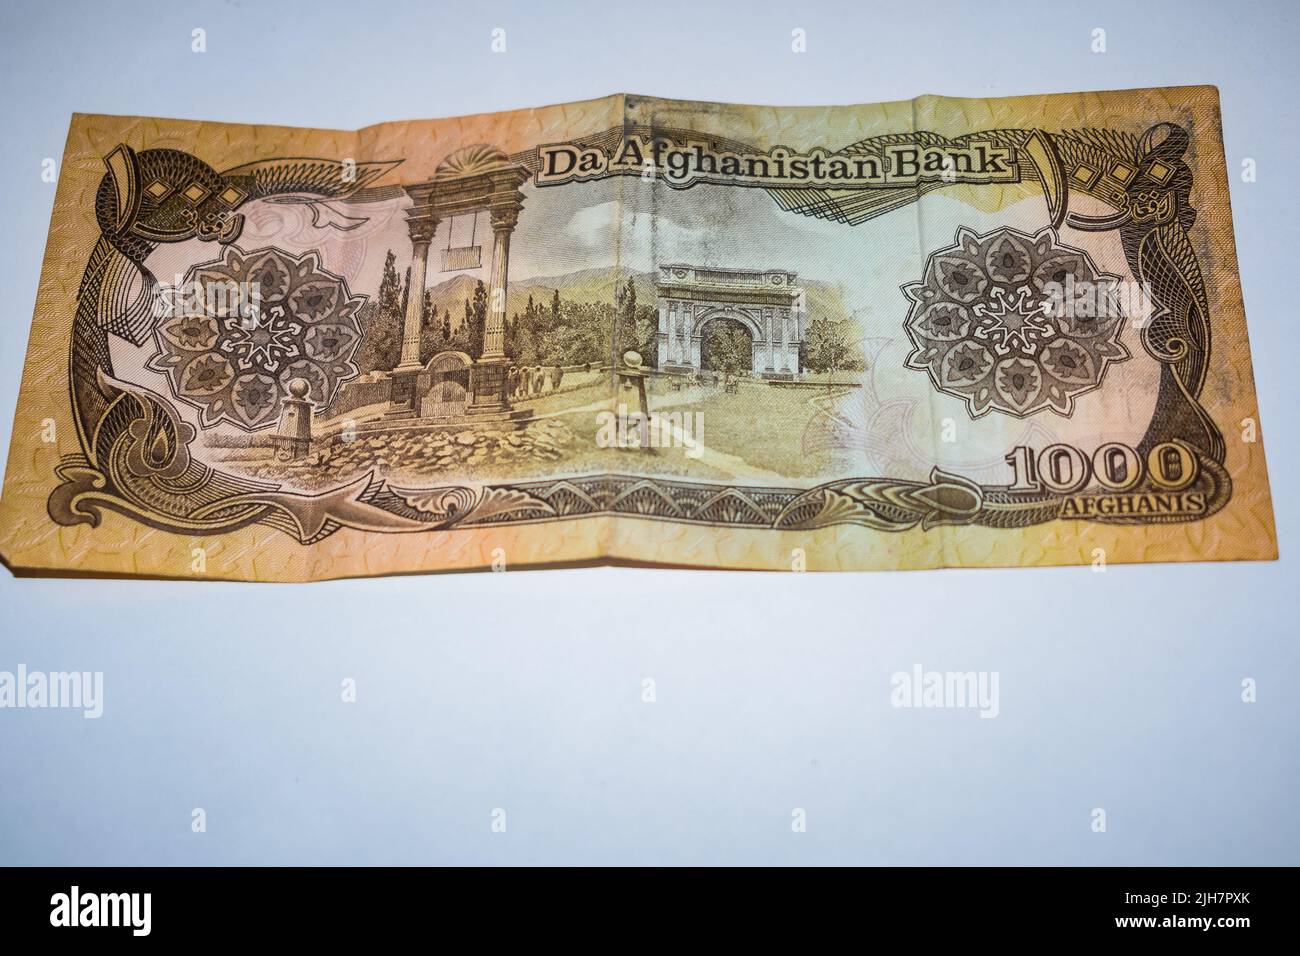 Rare Old One thousand afgans Foreign Currency Note, Afganistan Old Foreign Currency Note, Very old currency with white background Stock Photo